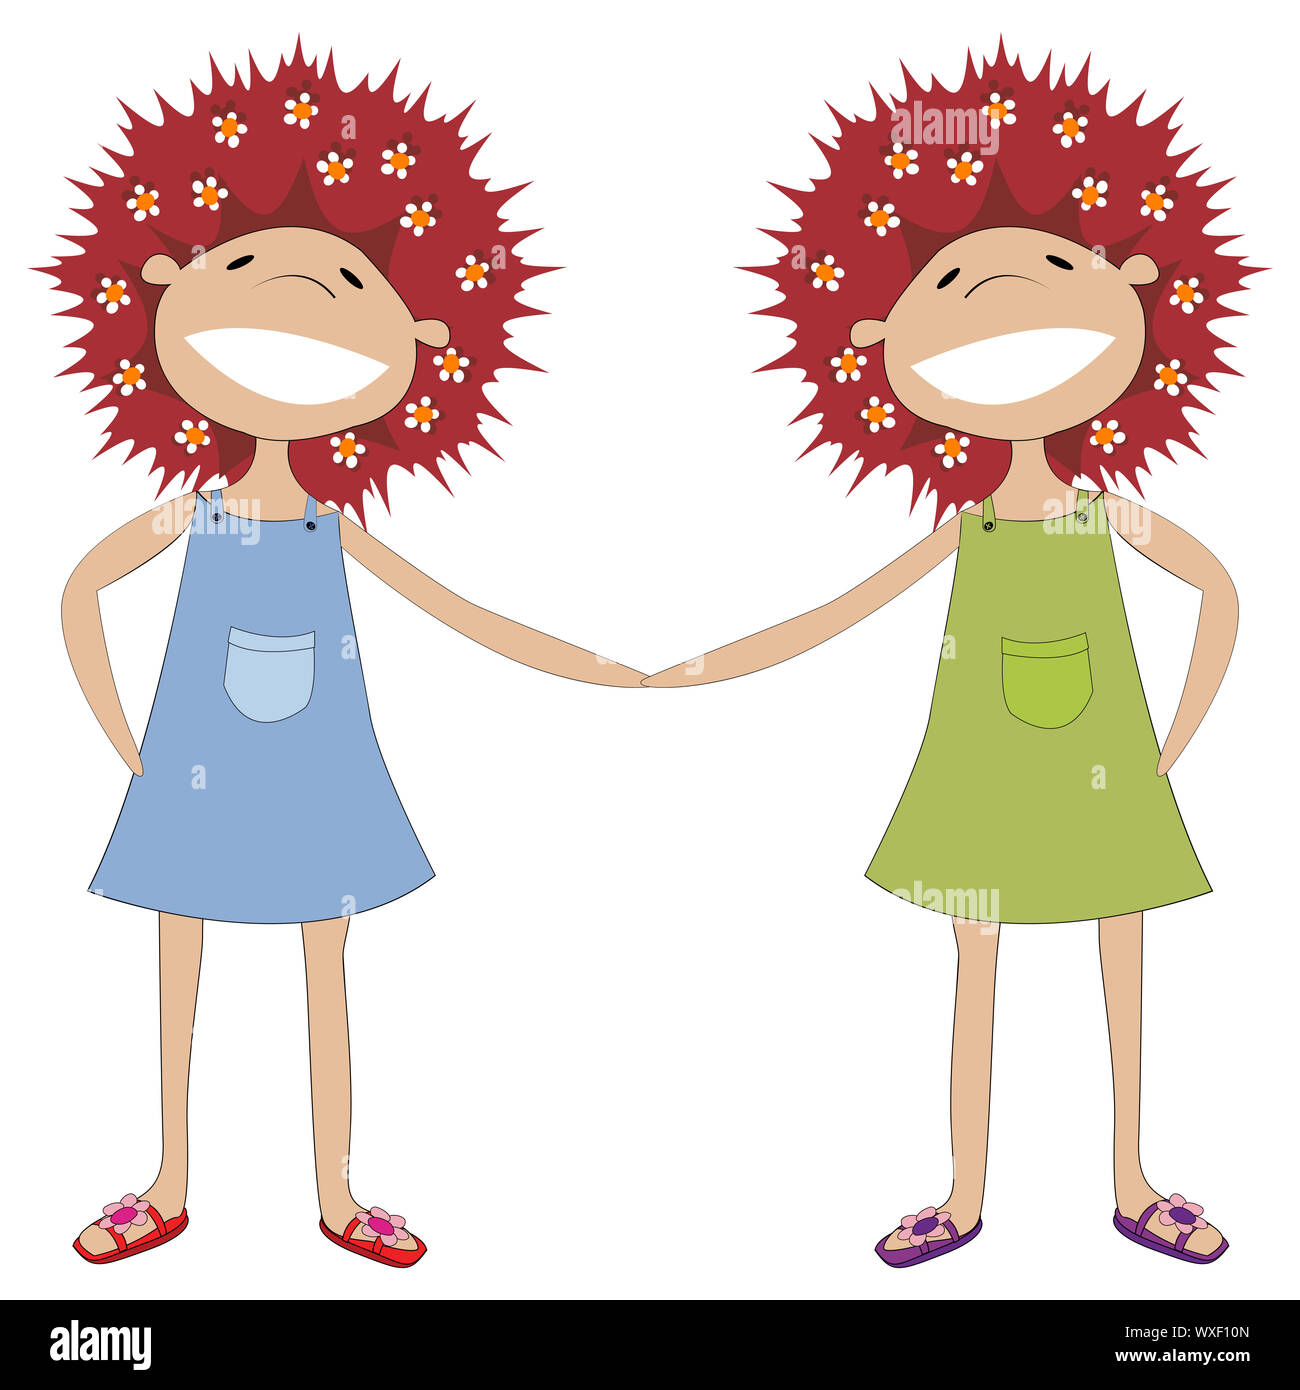 illustration of twin sisters holding hands Stock Photo - Alamy